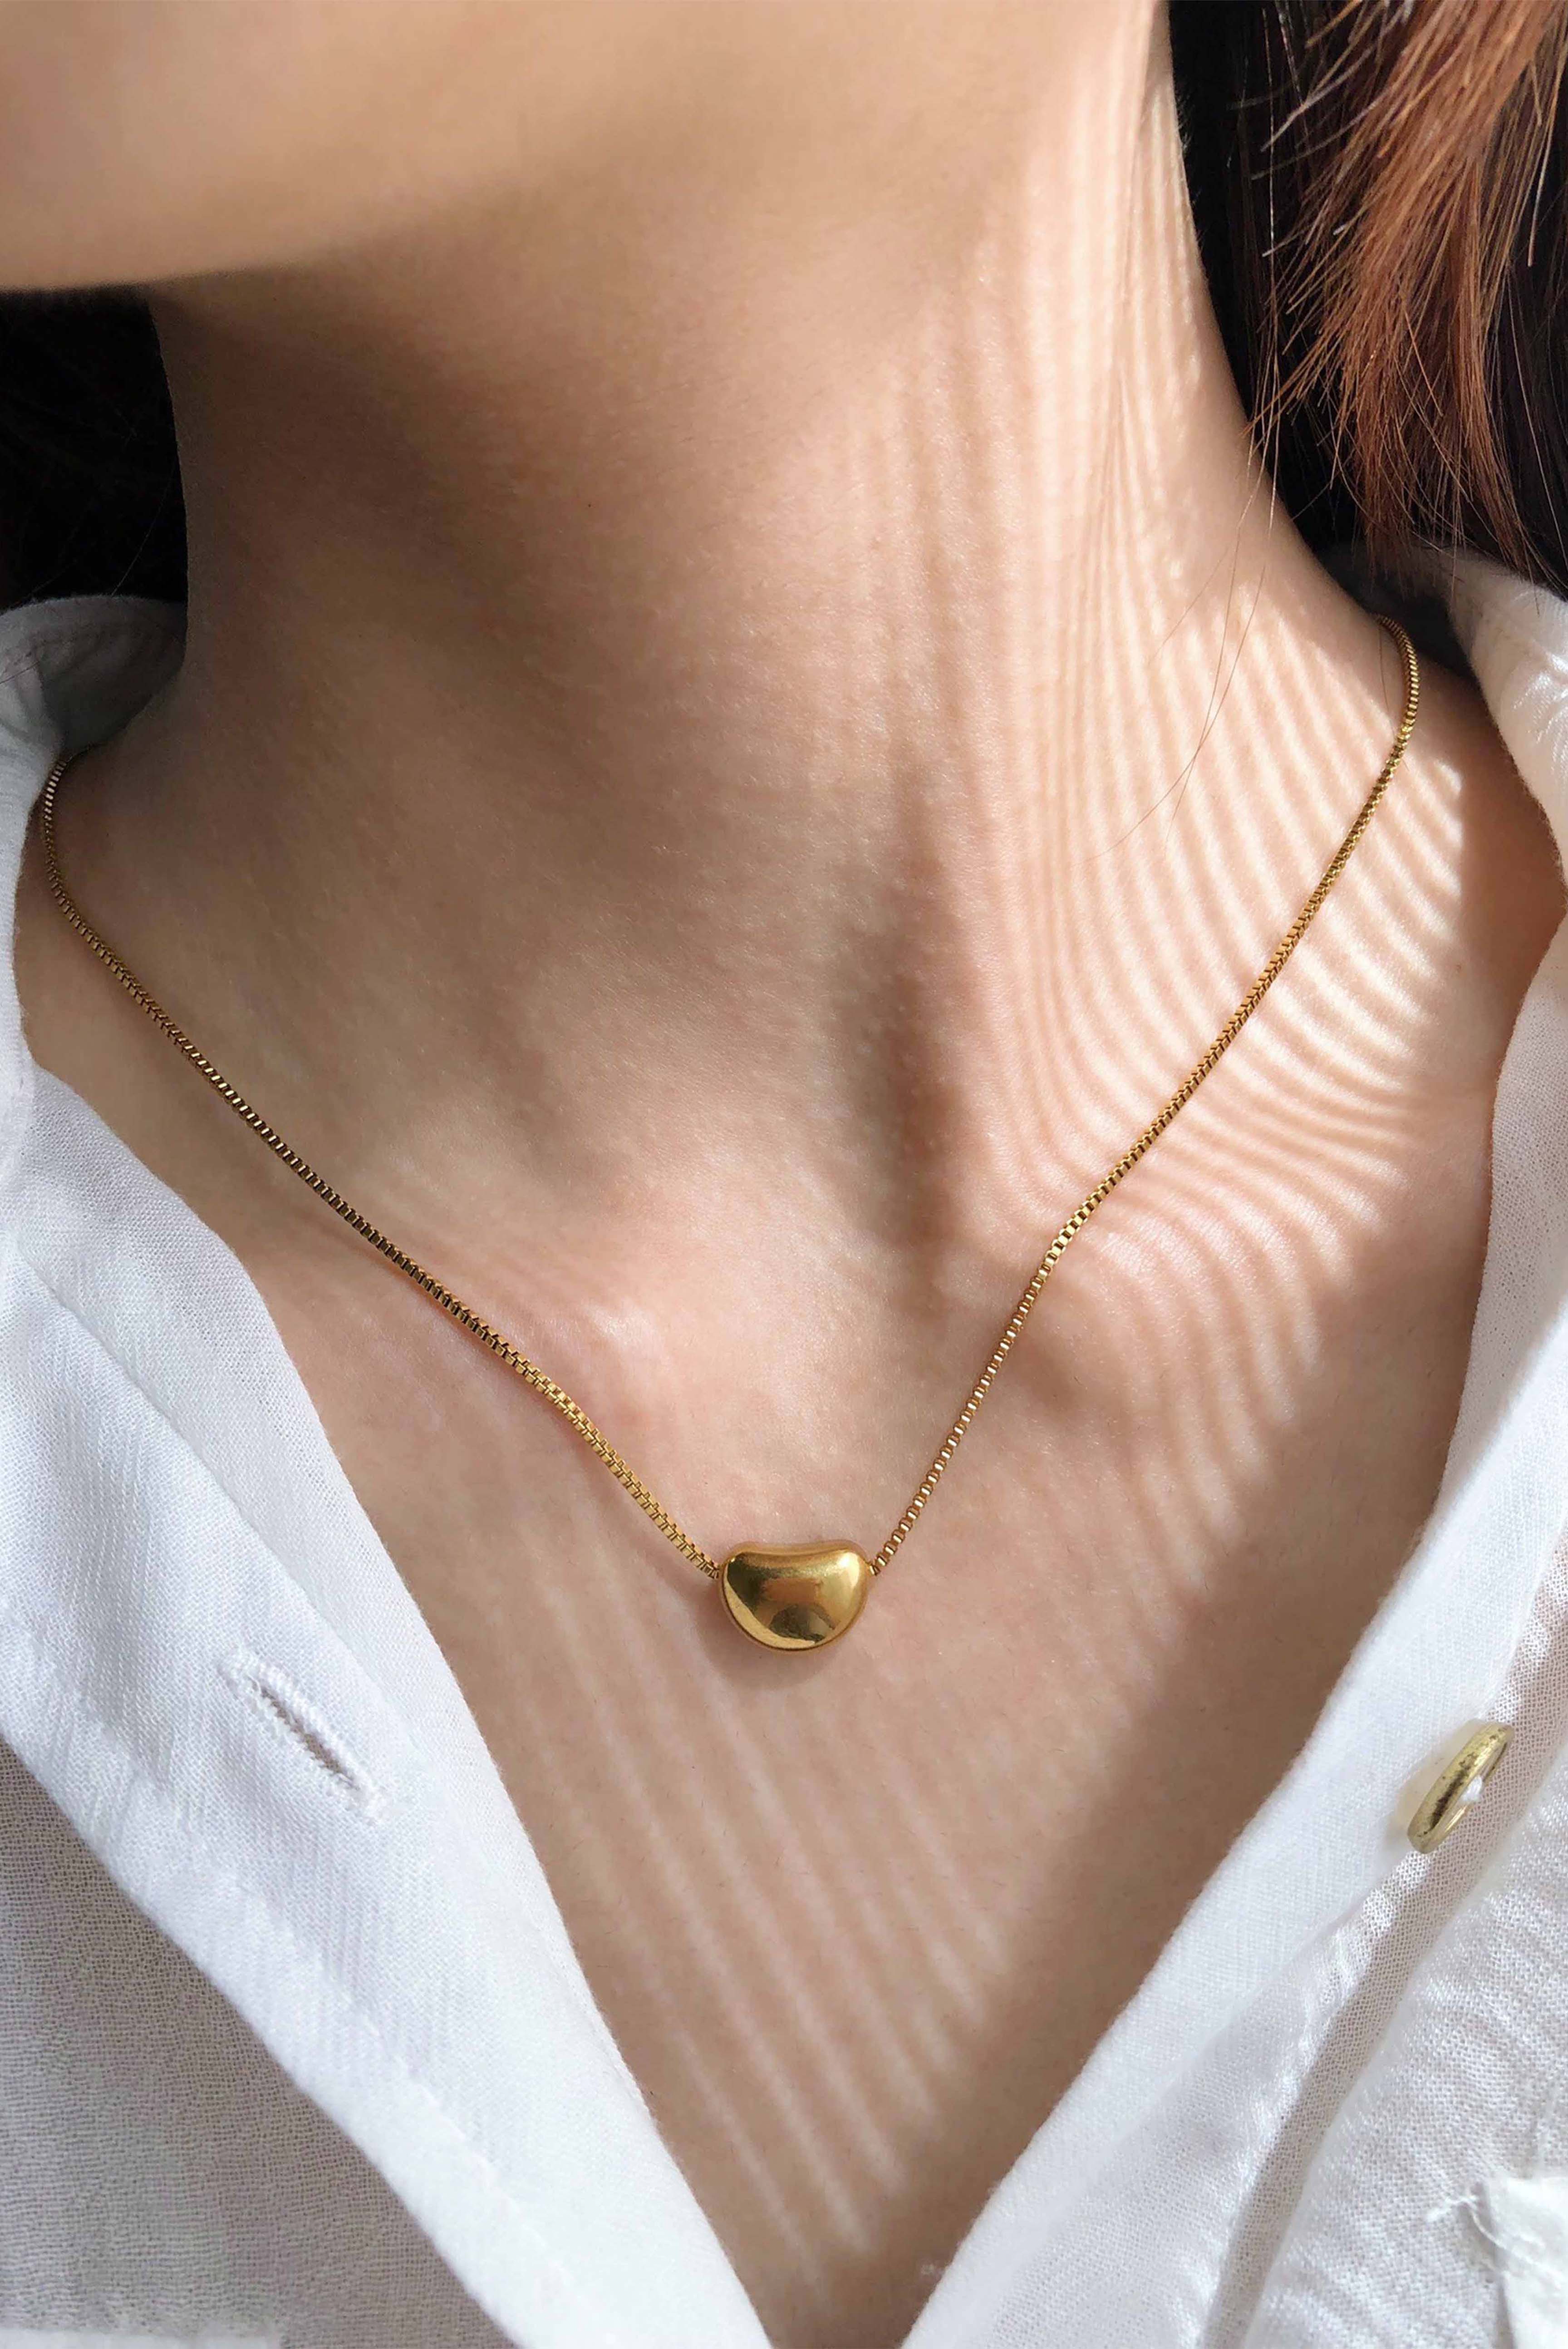 BEANS GOLD (NECKLACE)